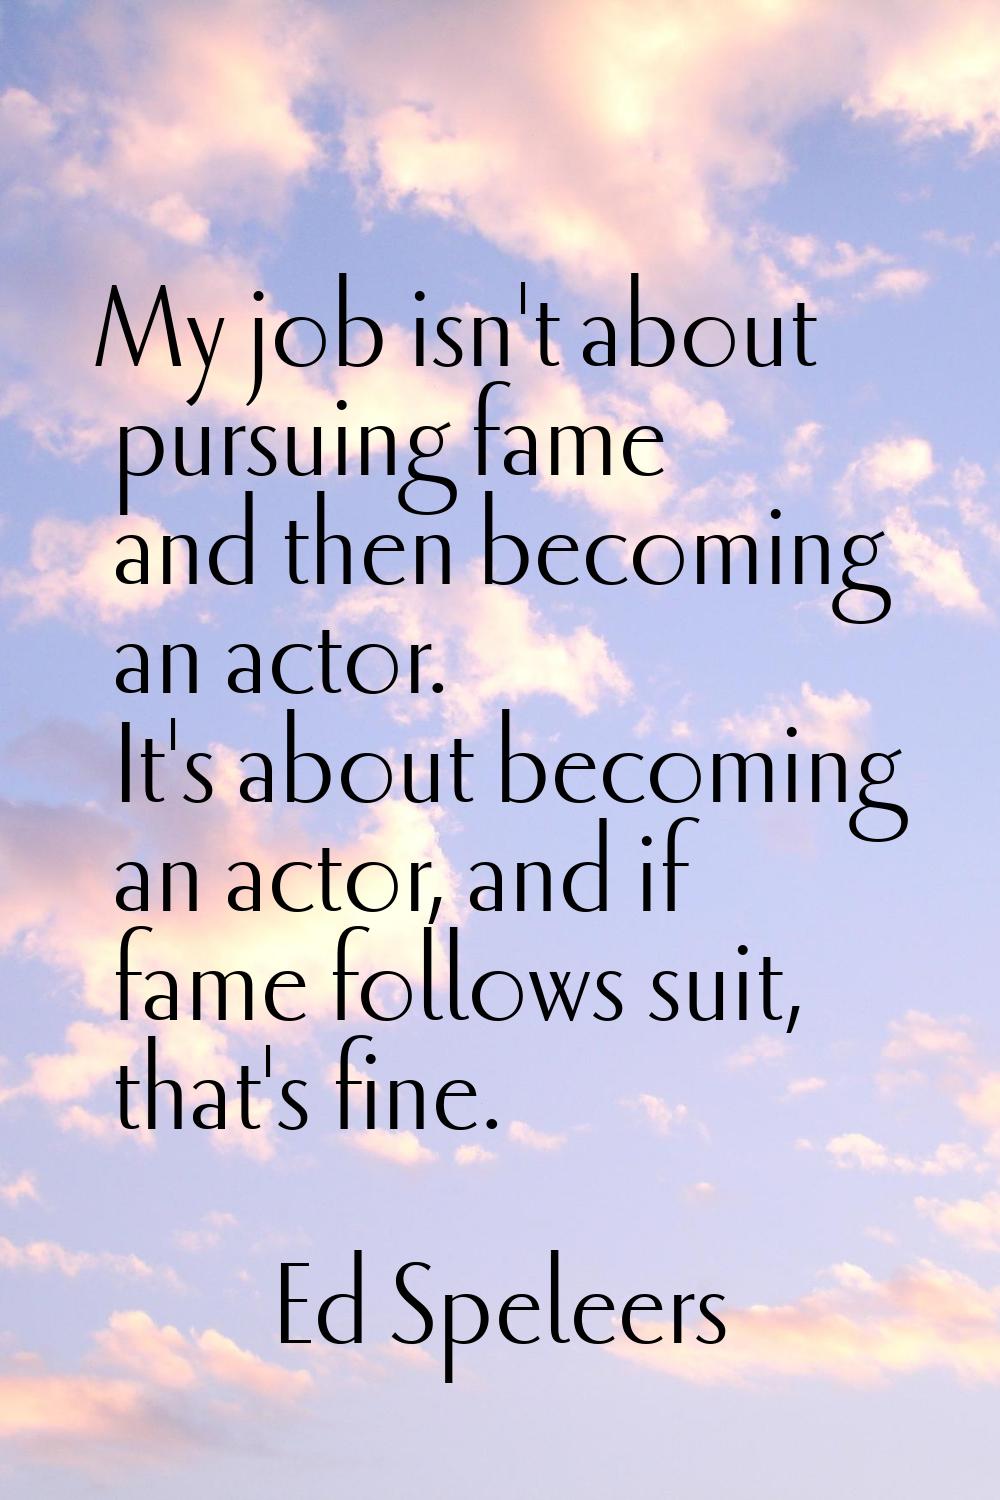 My job isn't about pursuing fame and then becoming an actor. It's about becoming an actor, and if f